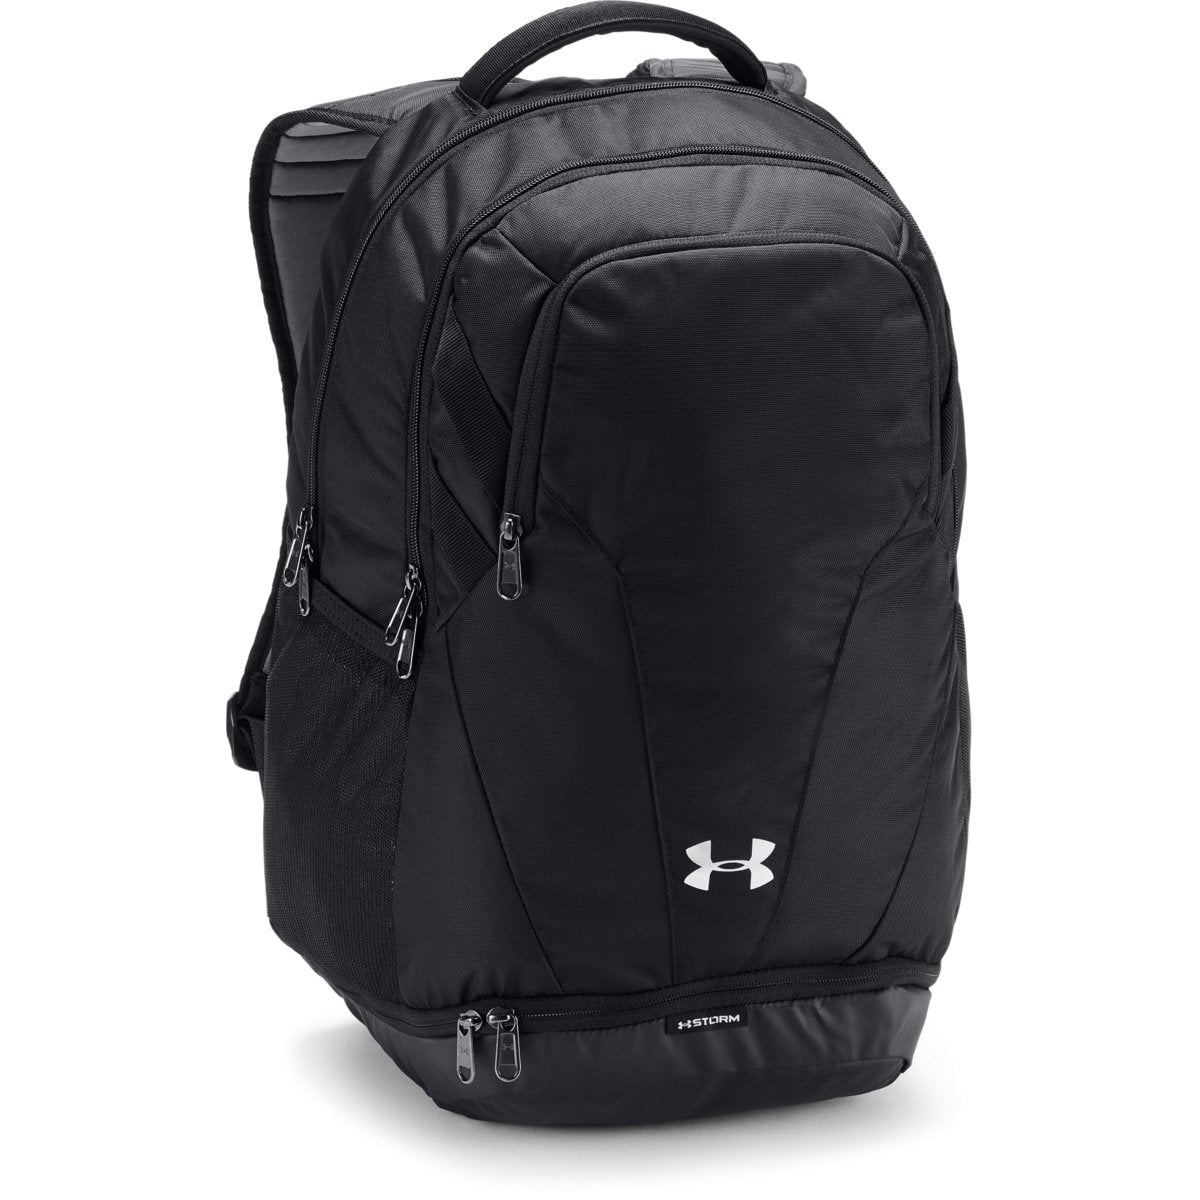 Used Under Armour Bag Basketball Equipment Bags